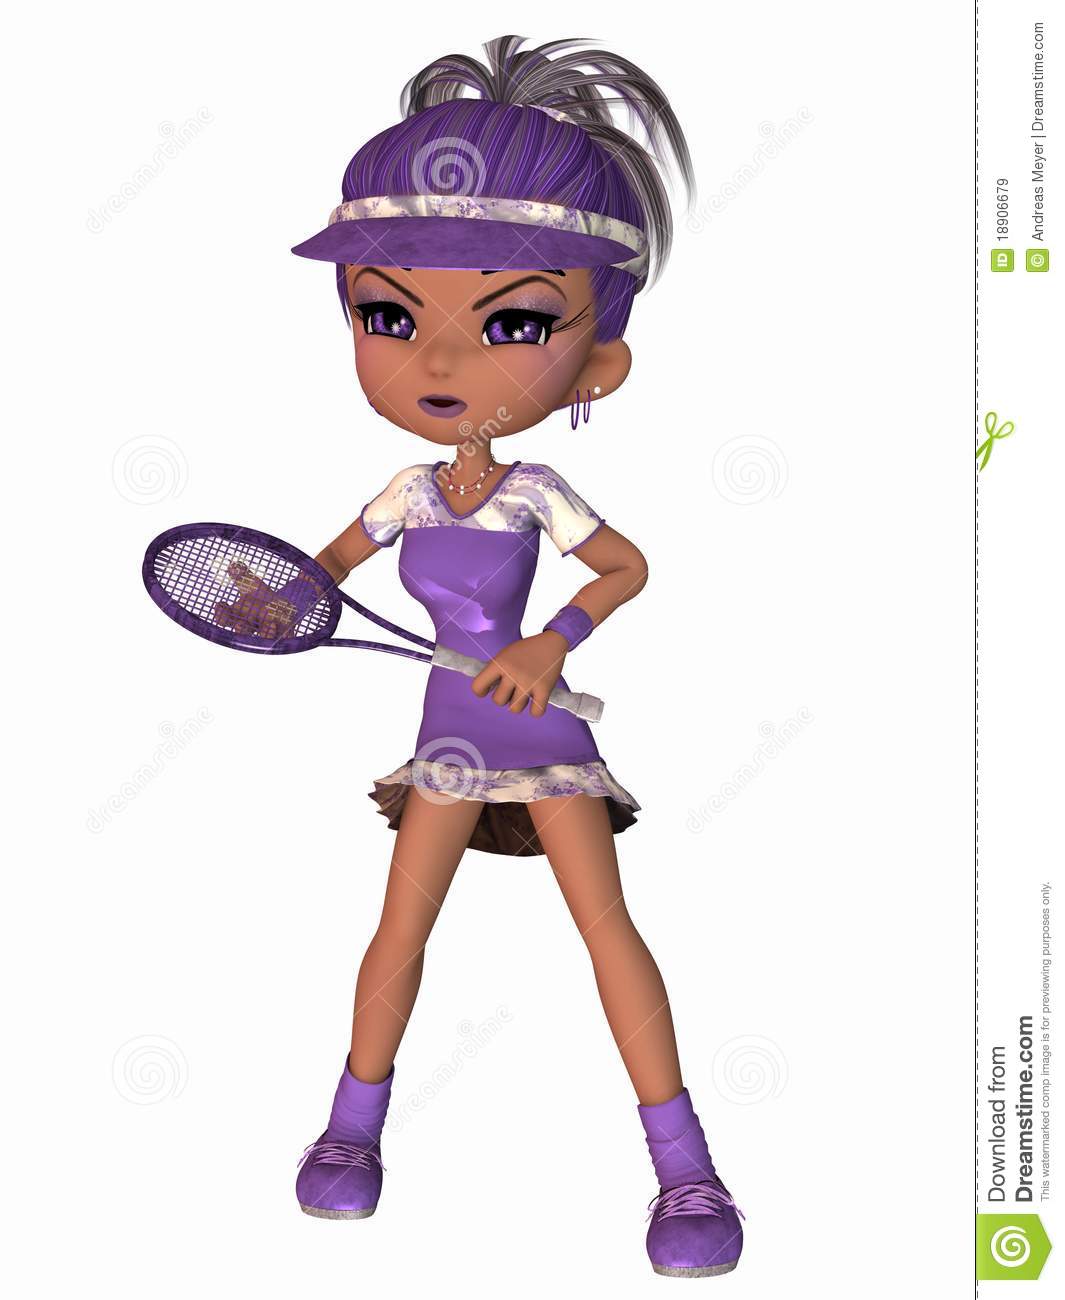 Cute Tennis Player Royalty Free Stock Images   Image  18906679